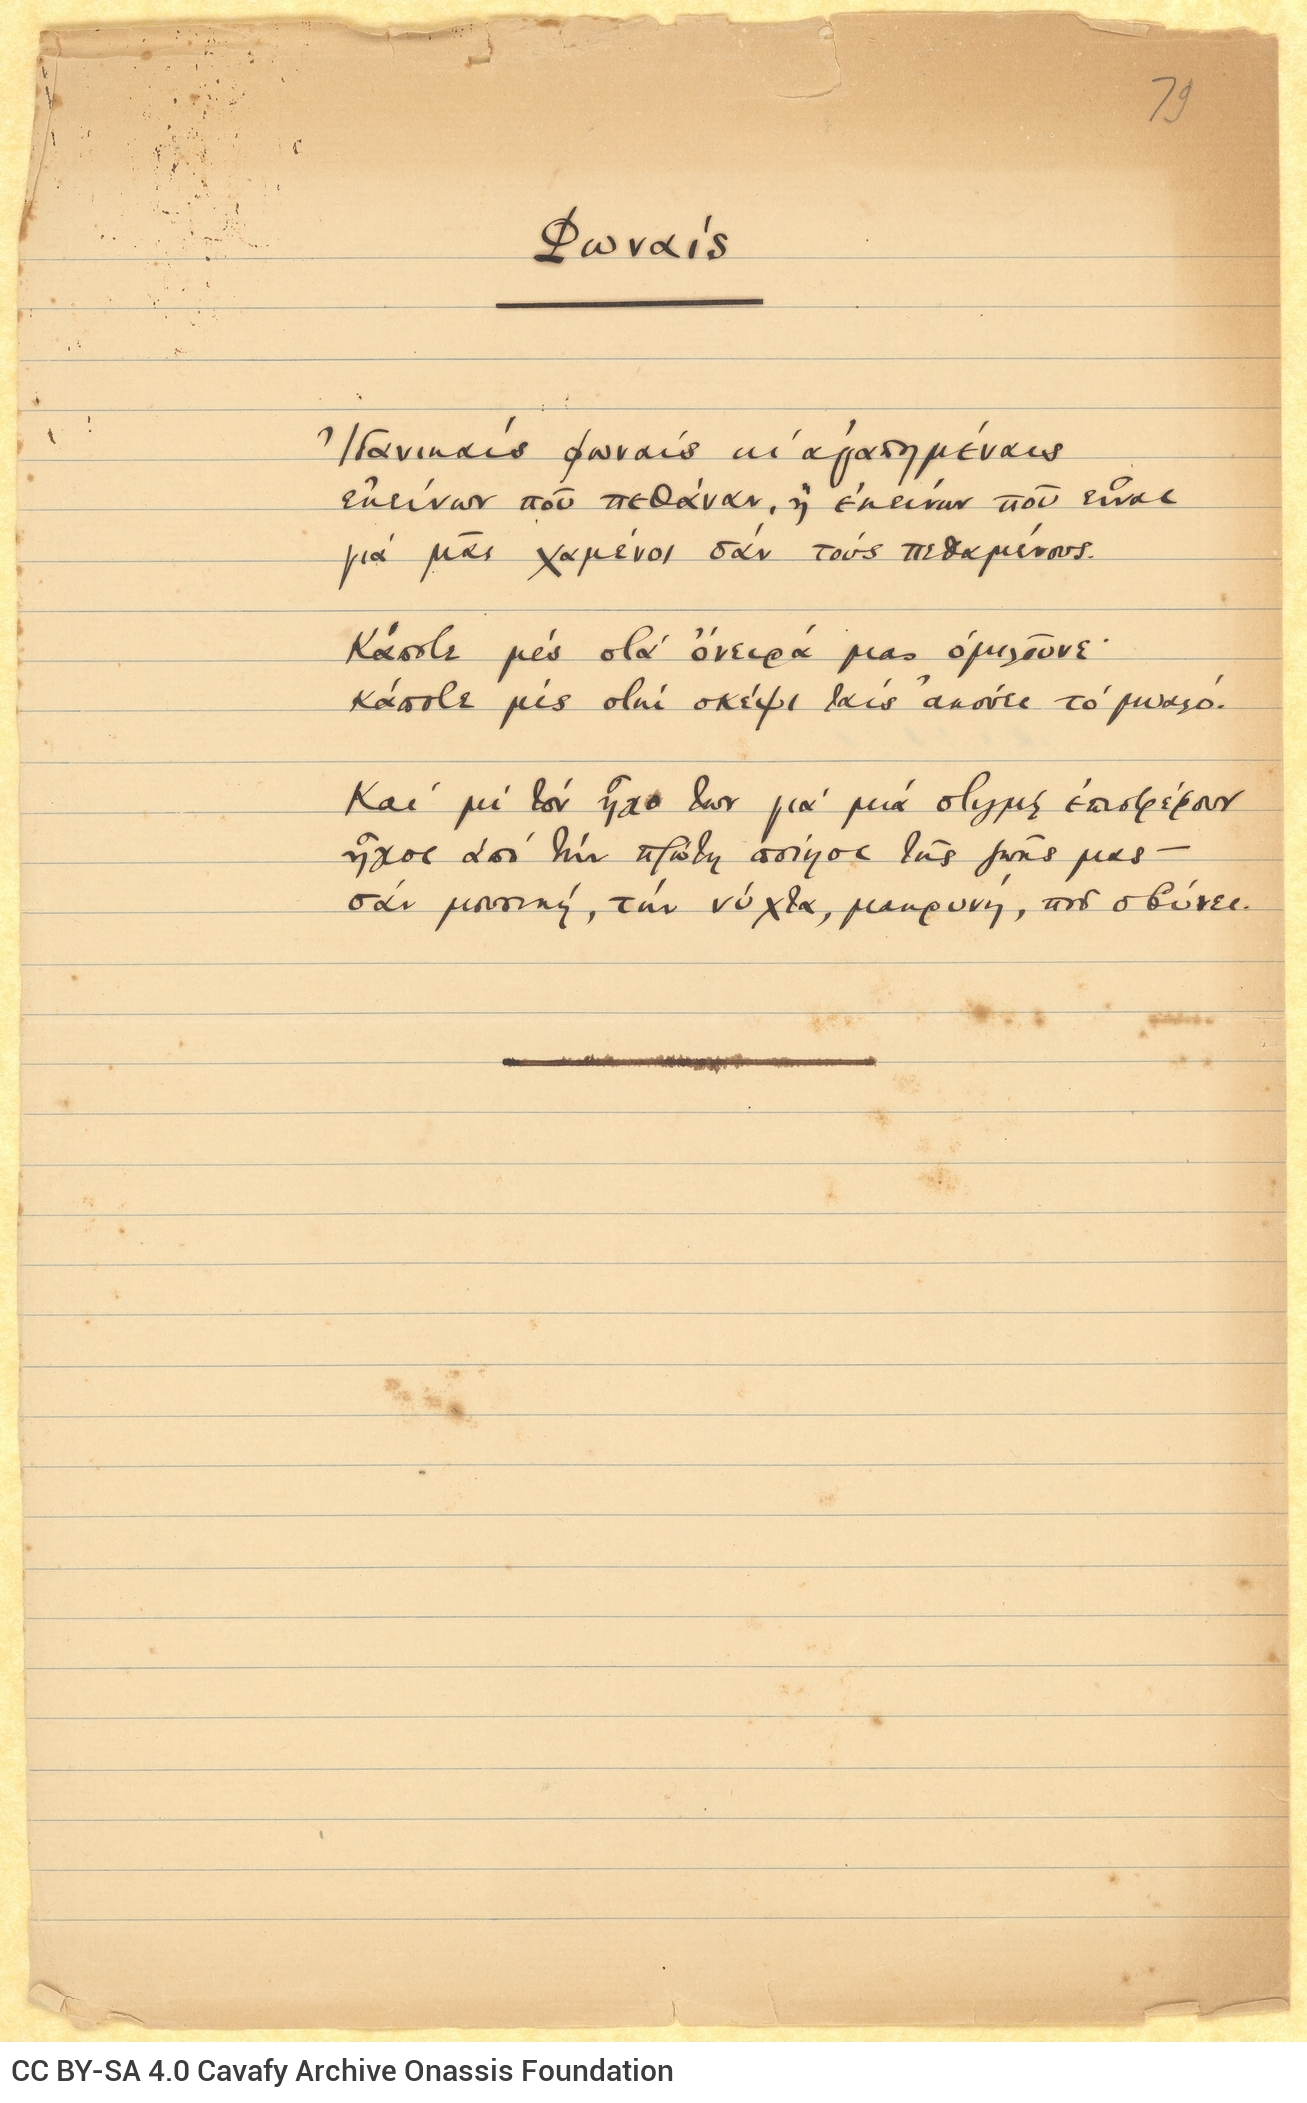 Manuscript of the poem "Voices" on one side of a ruled sheet. Number "79" at top right. Blank verso.